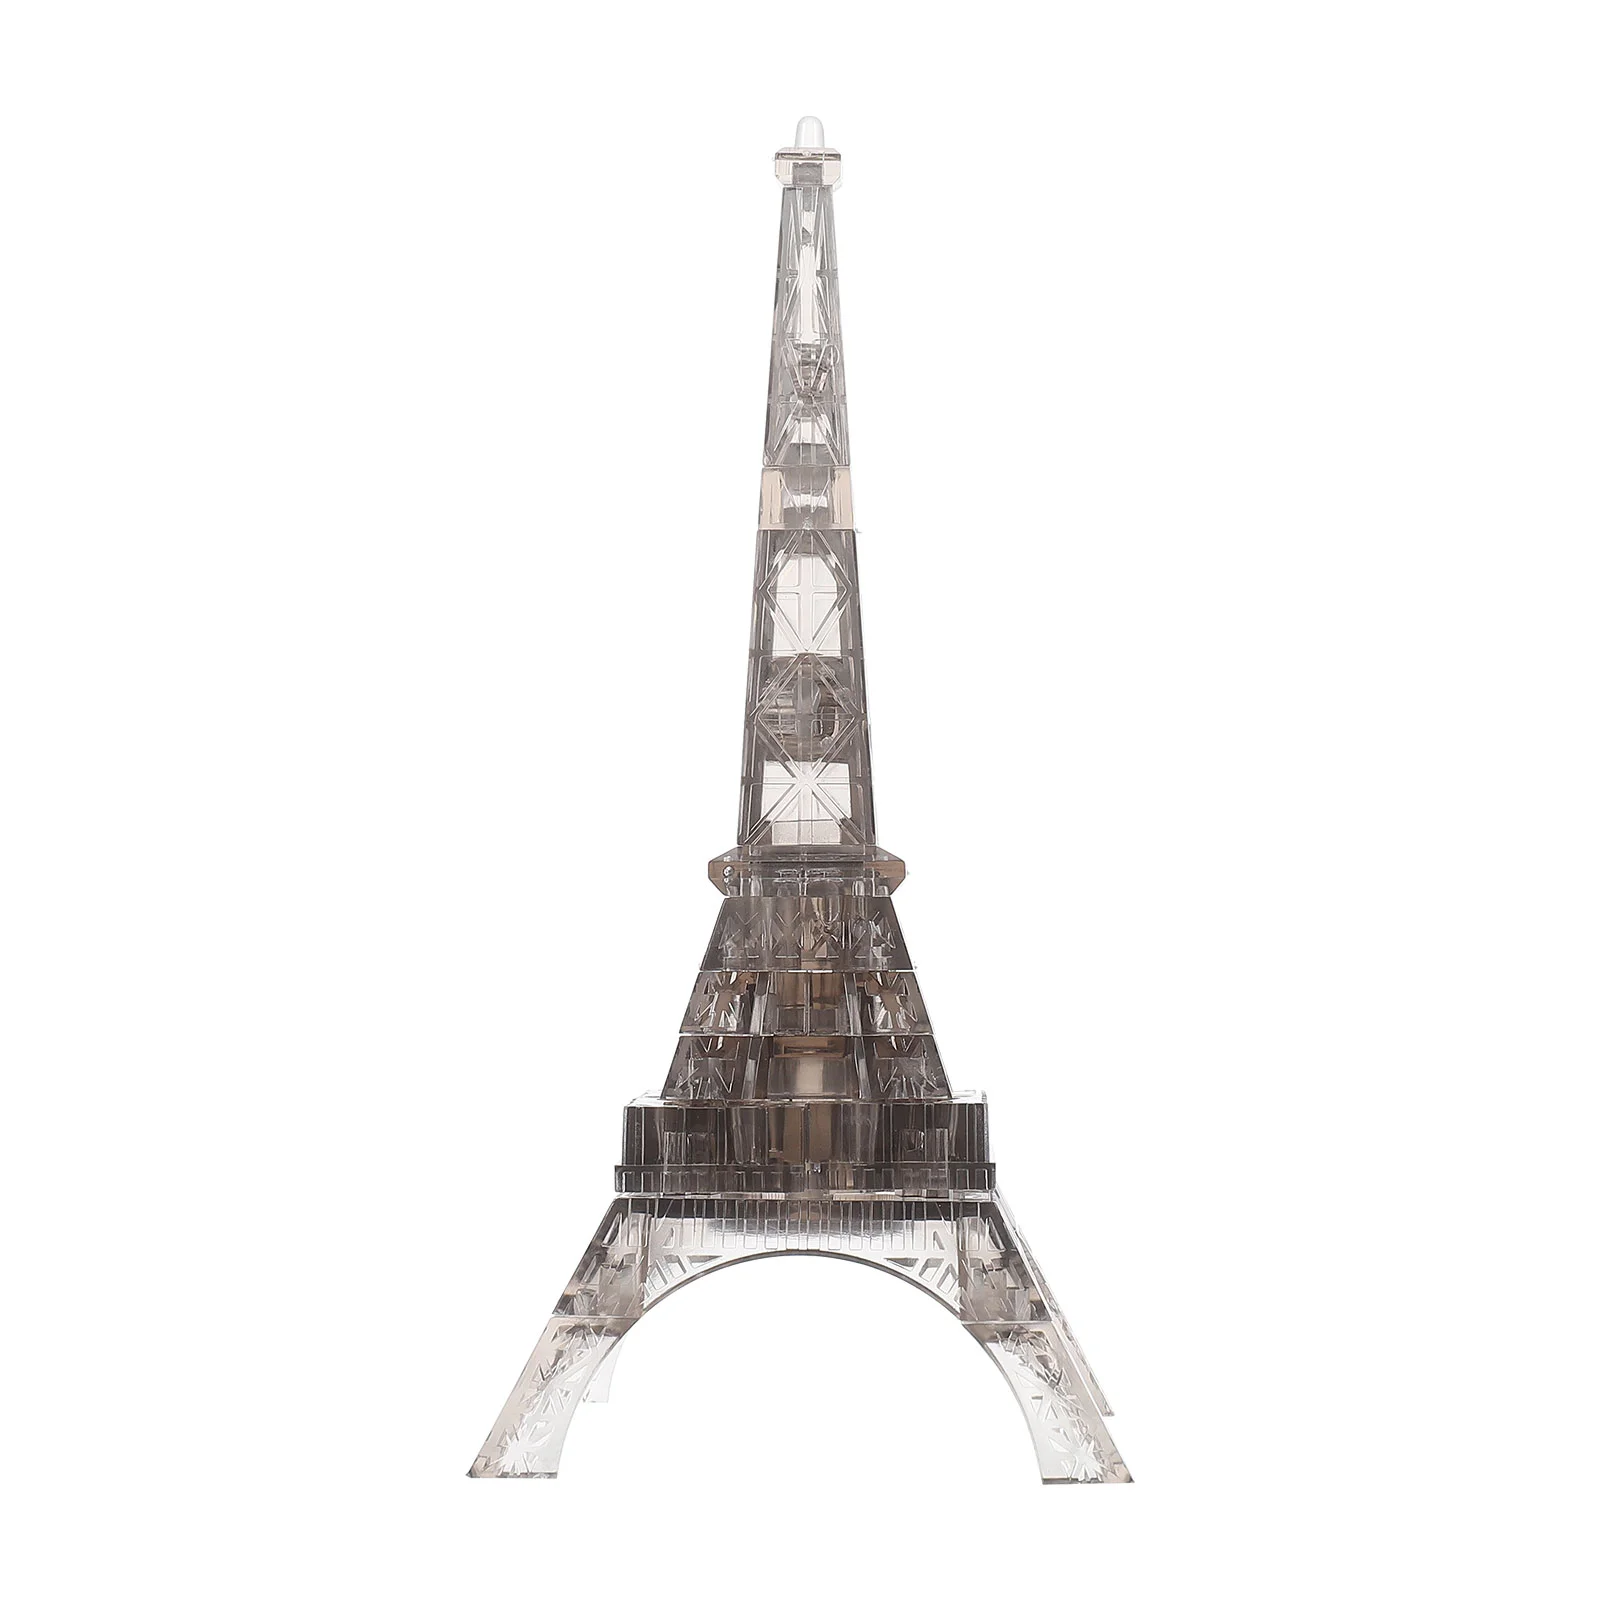 3D Transparent Eiffel Tower Puzzle Crystal Jigsaw Pieces Building Blocks Brain Teaser Educational Early Learning, Grey set of 5pcs transparent nail gel quick building nail tips clips